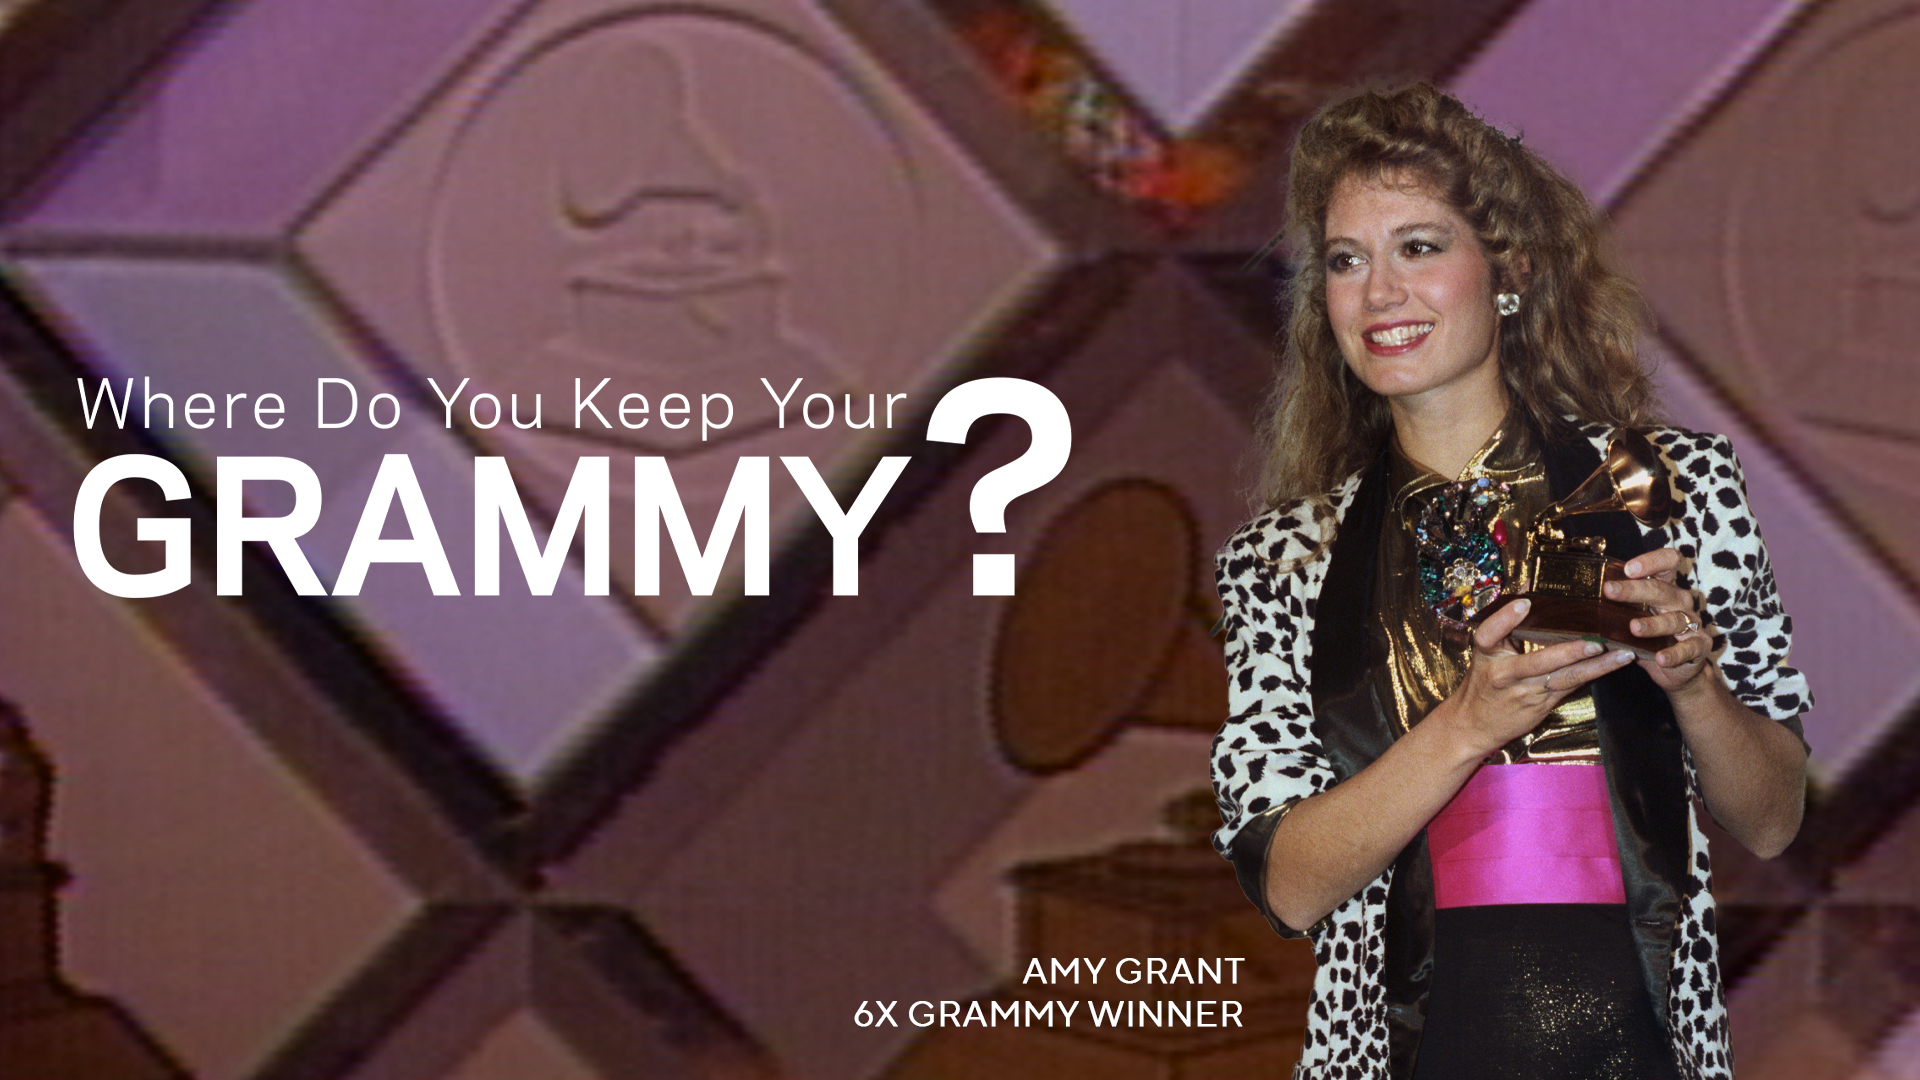 Amy Grant Shares Where She Keeps Her GRAMMYs